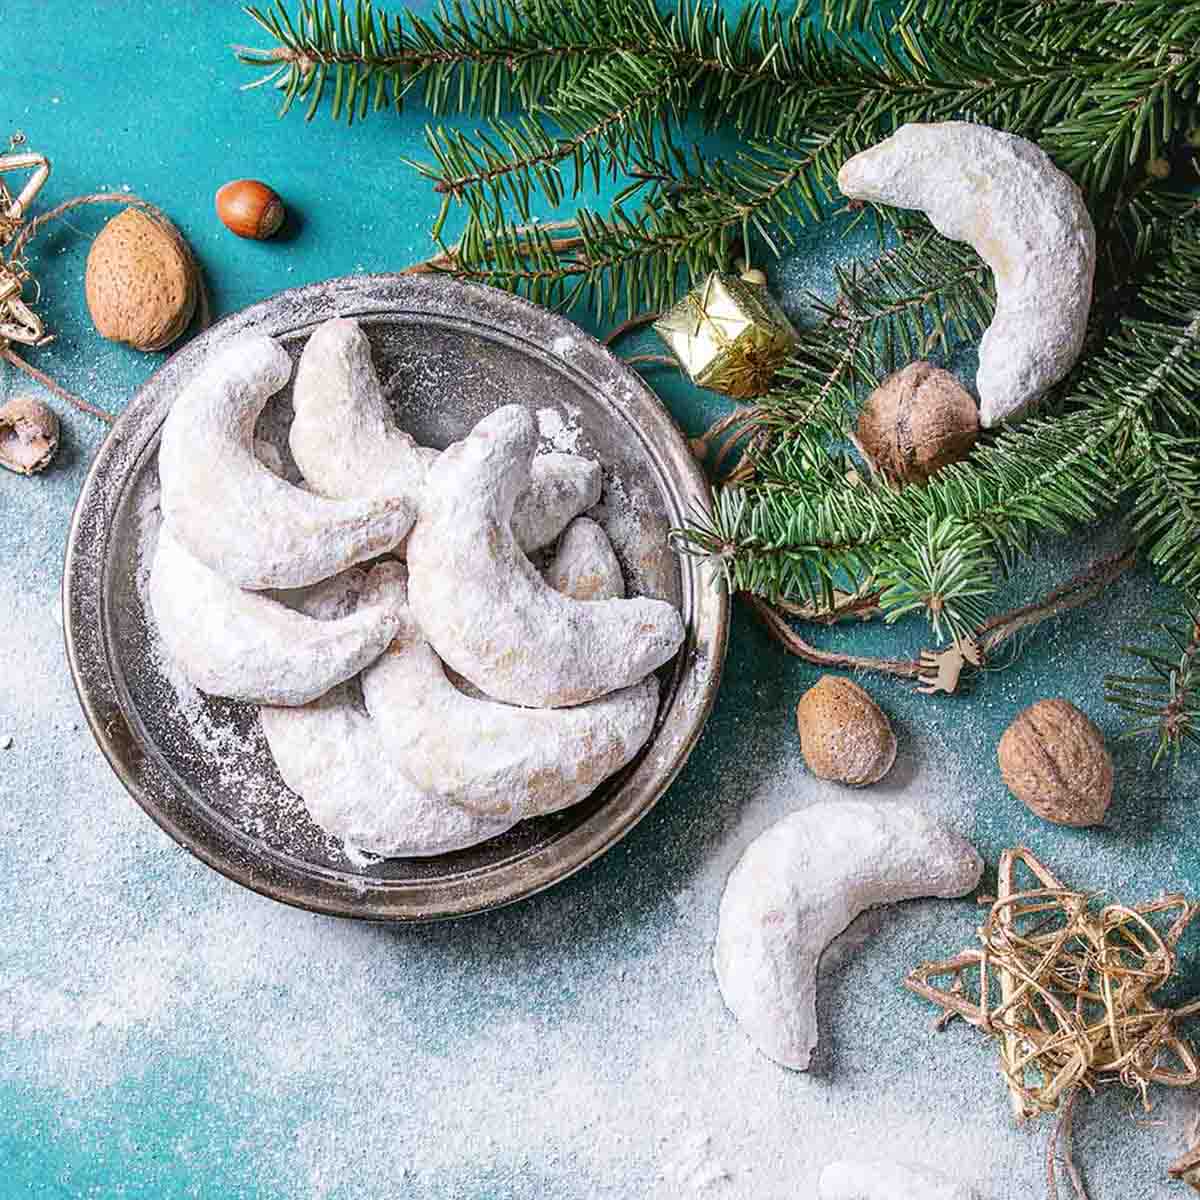 A pile of crescent-shaped cookies on a platter with greenery and Christmas ornaments on the side.